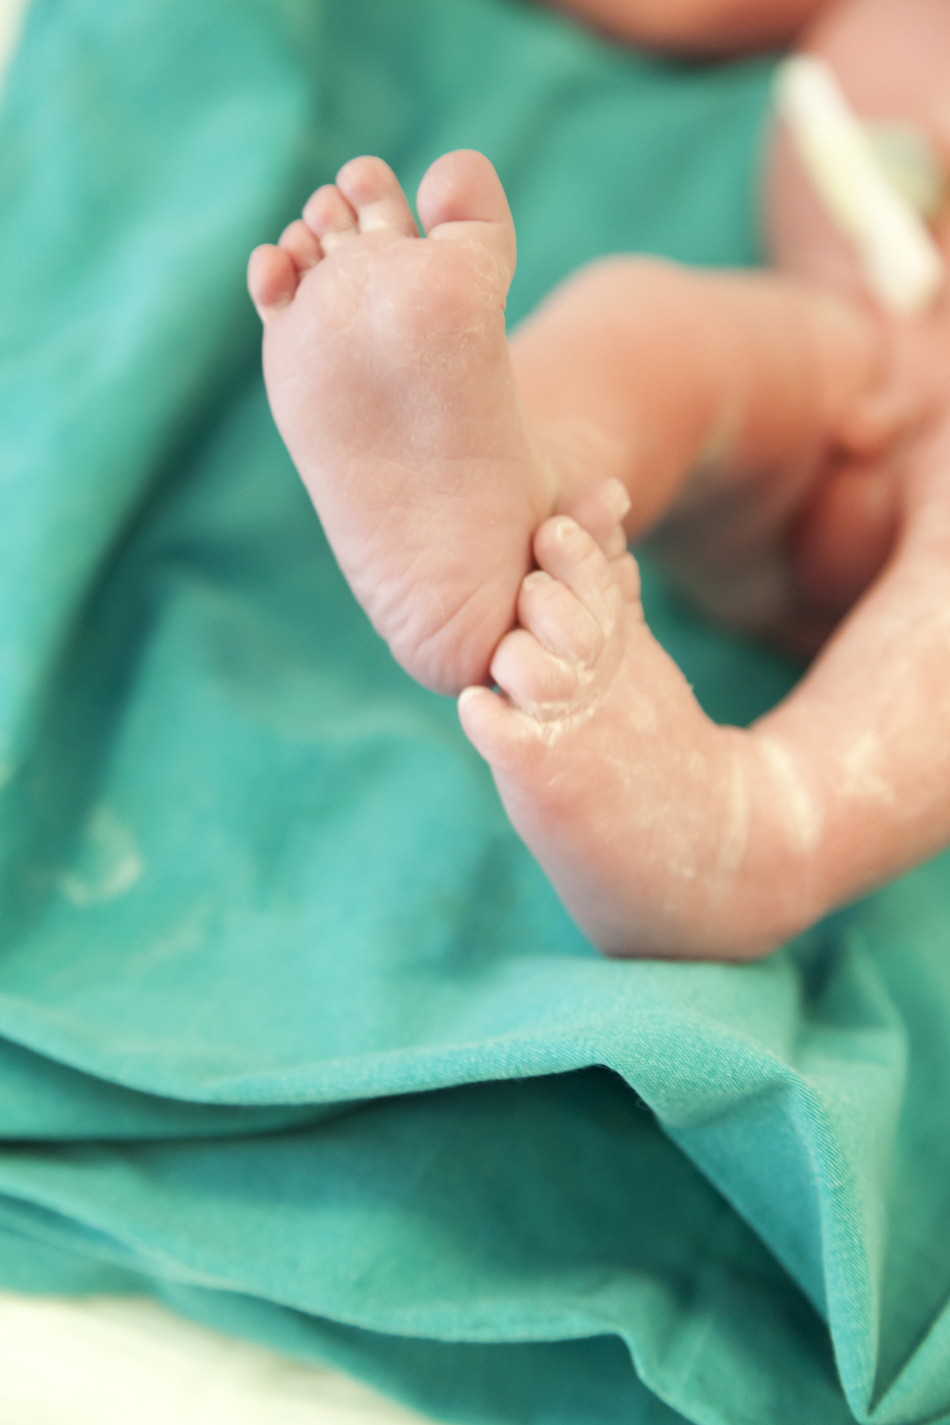 When Should You Cut the Umbilical Cord?